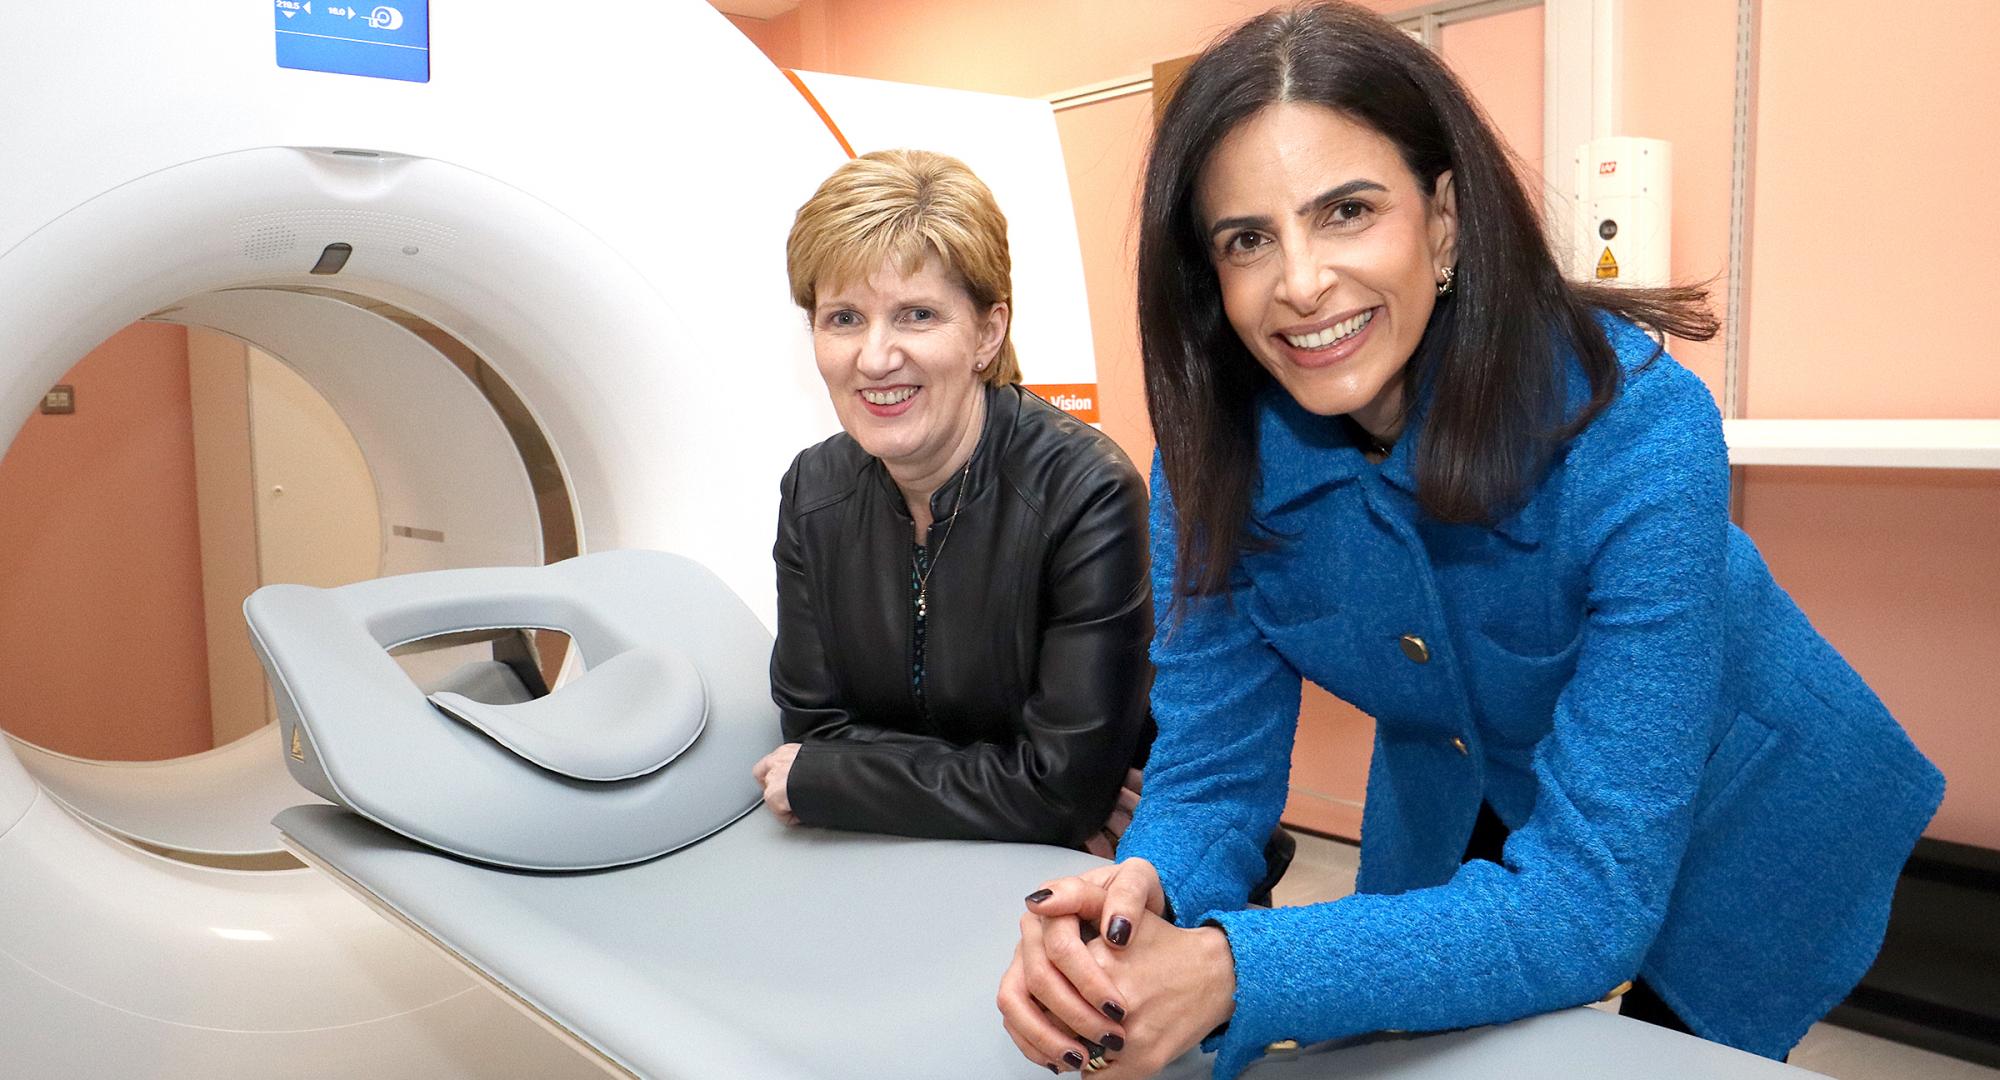 [from left to right] Bernie Owens - Deputy Chief Executive at Belfast Health and Social Care Trust and Ghada Trotabas - Managing Director at Siemens Healthineers Great Britain and Ireland with imaging system from Siemens Healthineers at Royal Victoria Hospital